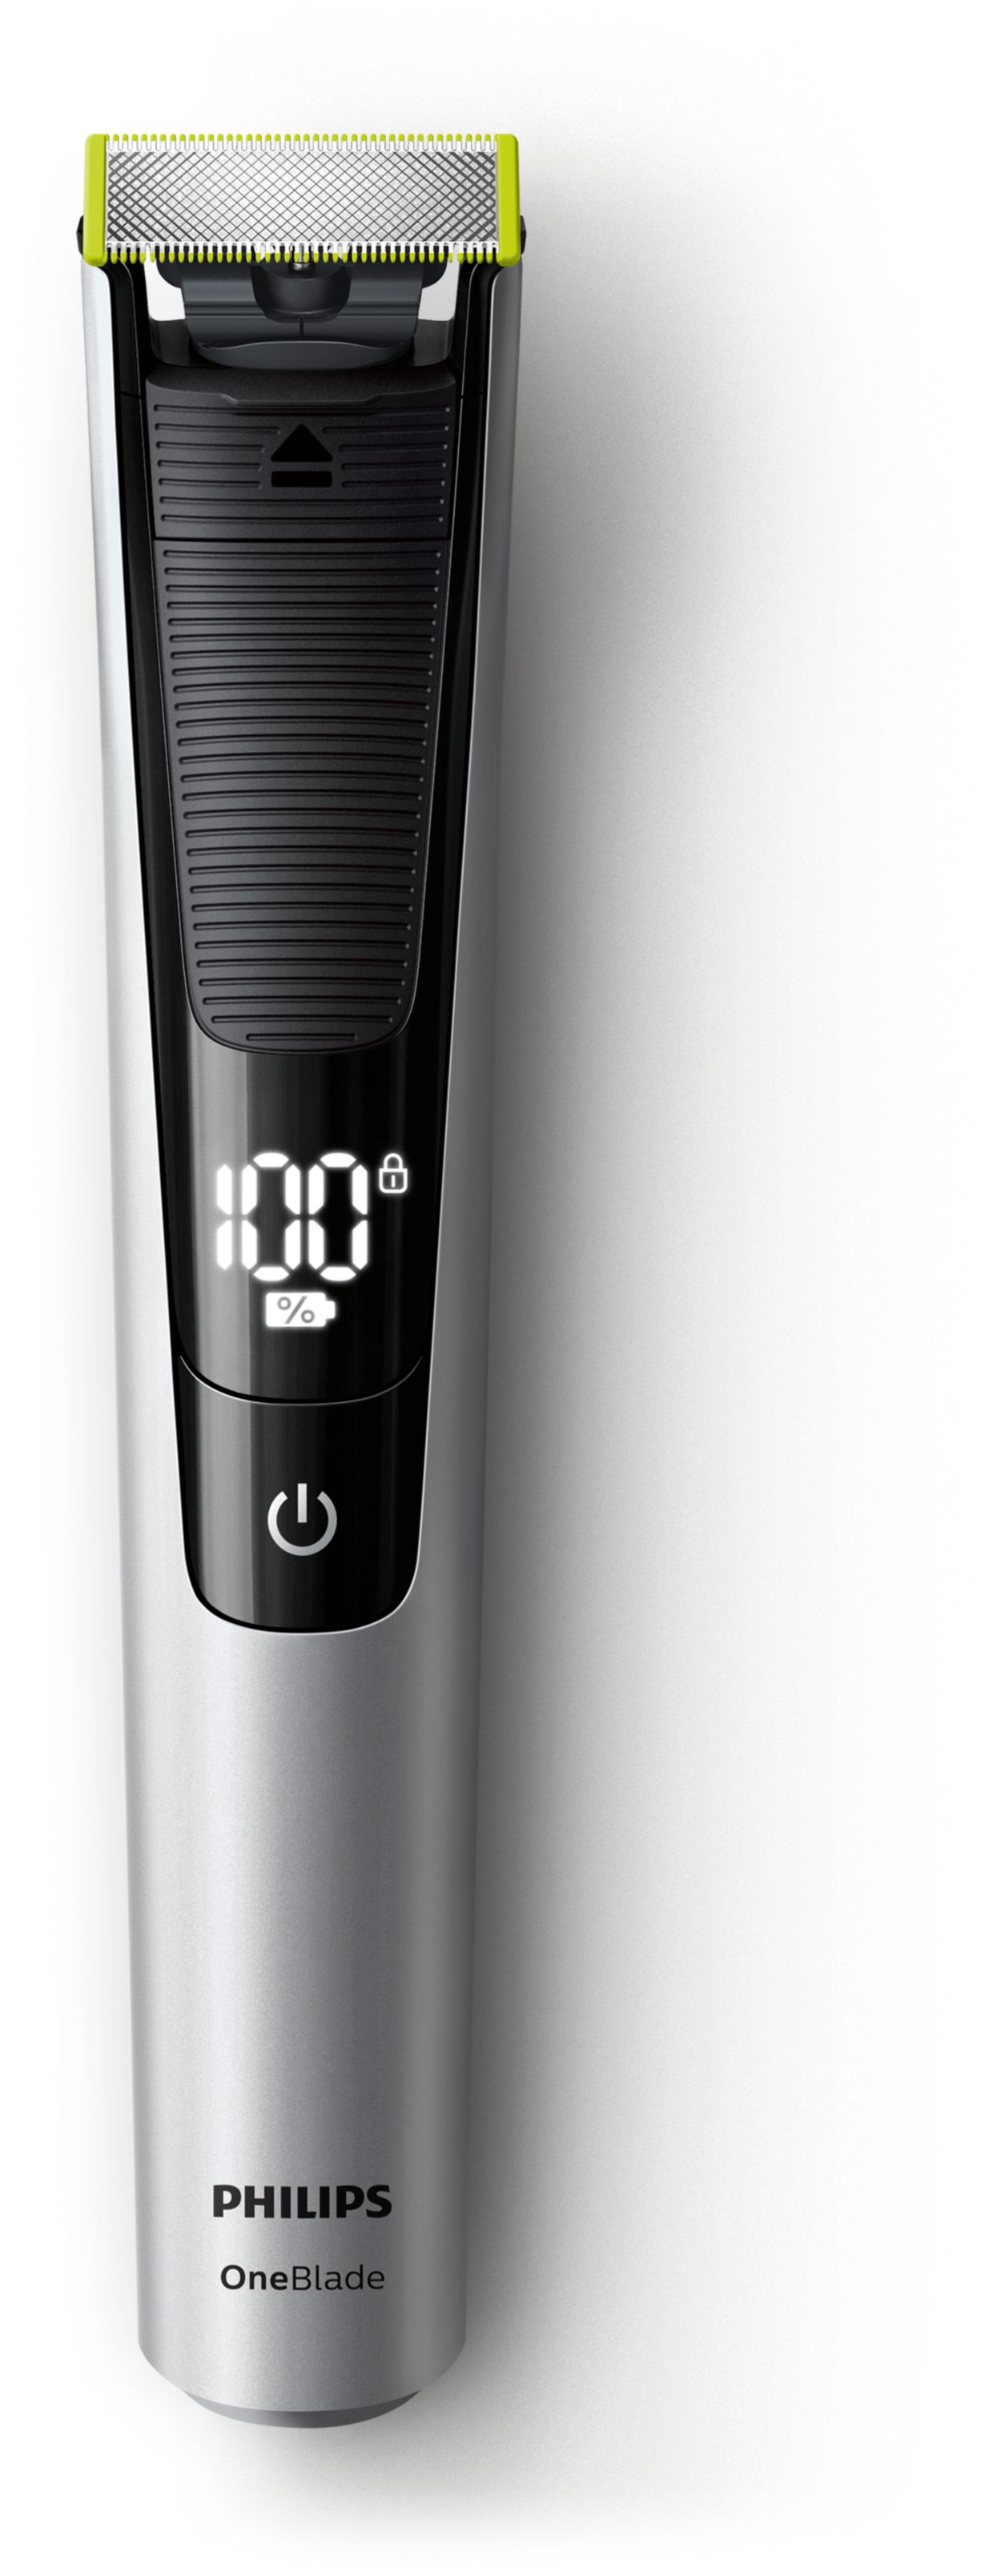 OneBlade Pro Ansigt QP6520/60 Philips